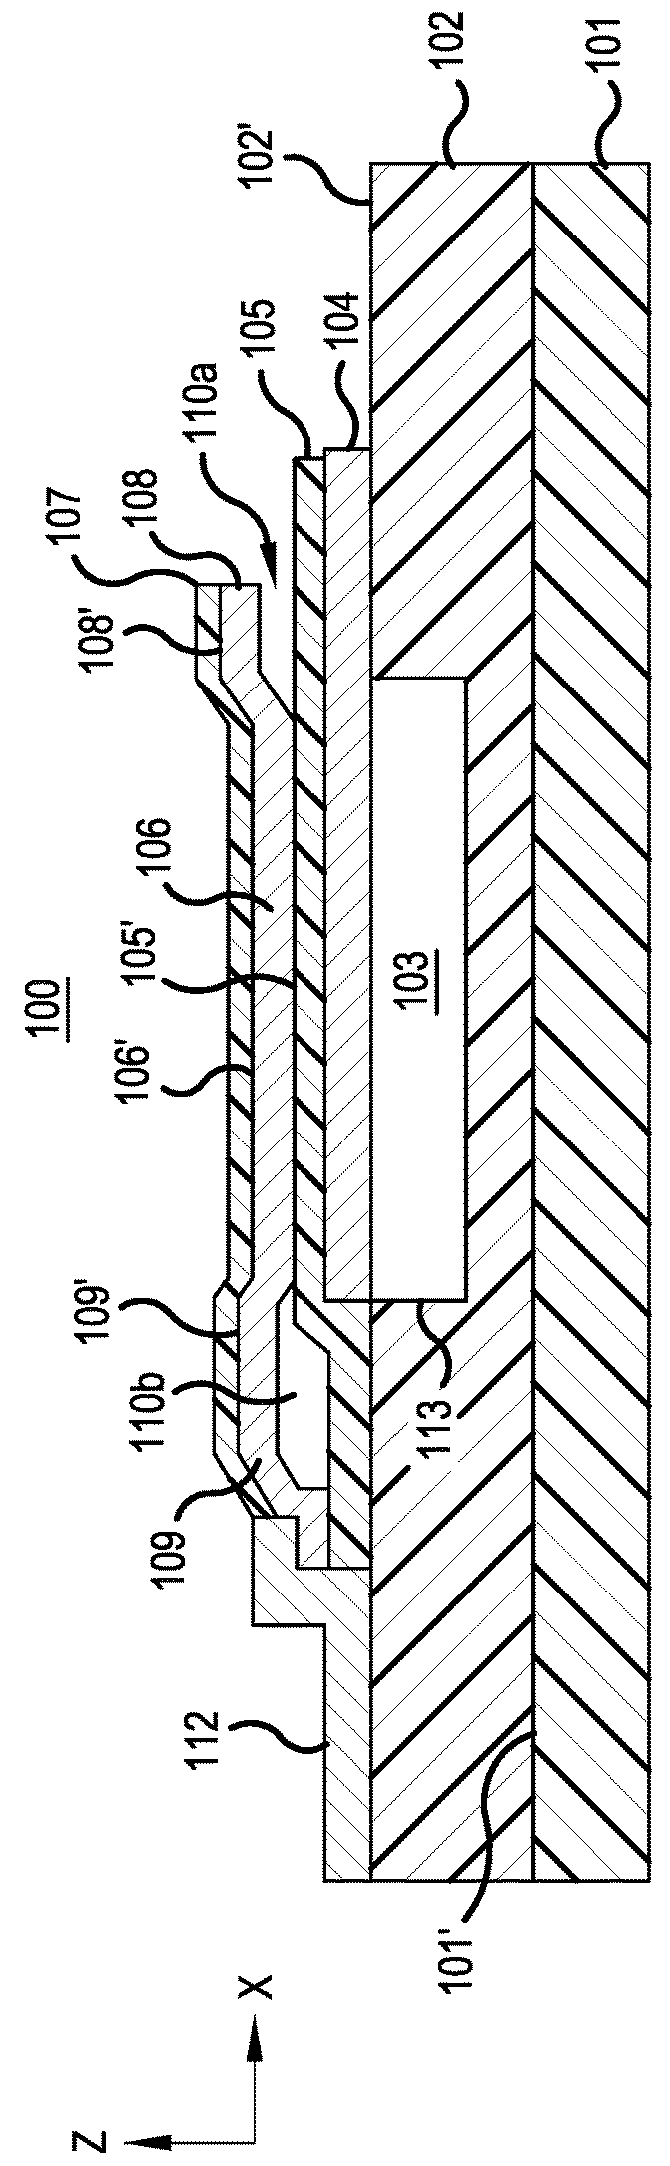 Packaged resonator with polymeric air cavity package